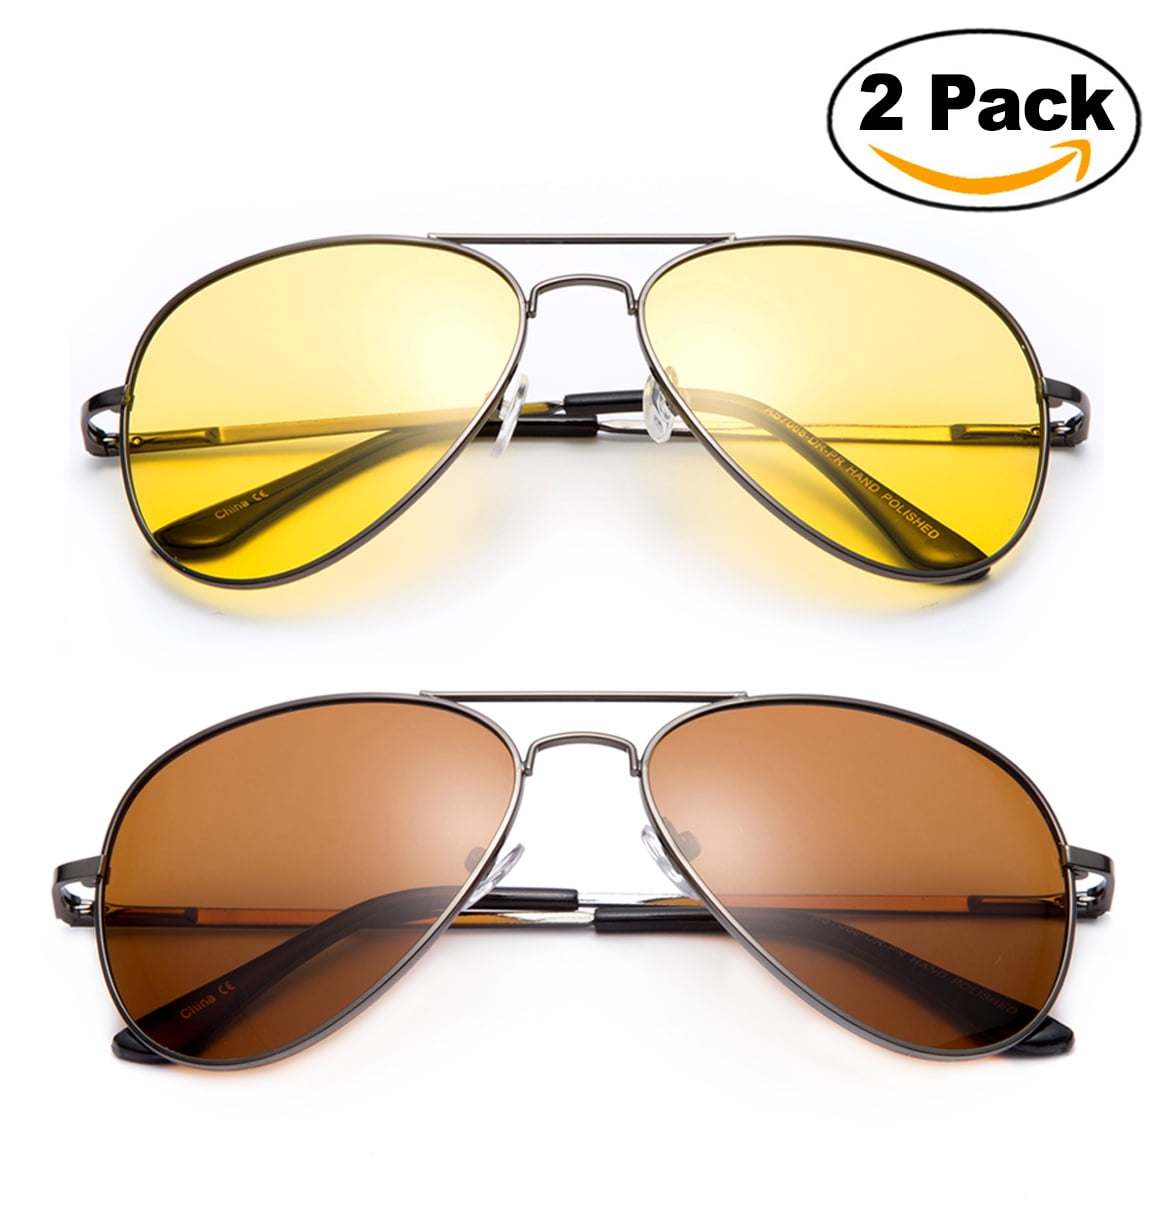 Smash kapperszaak Overjas 2 Pack - Night Vision Driving Glasses Yellow Amber Lens & Day Time Driving  Sunglasses Copper Lens-Classic Aviator Style Glasses with Comfortable  Spring Hinge Fit for Most People! - Walmart.com